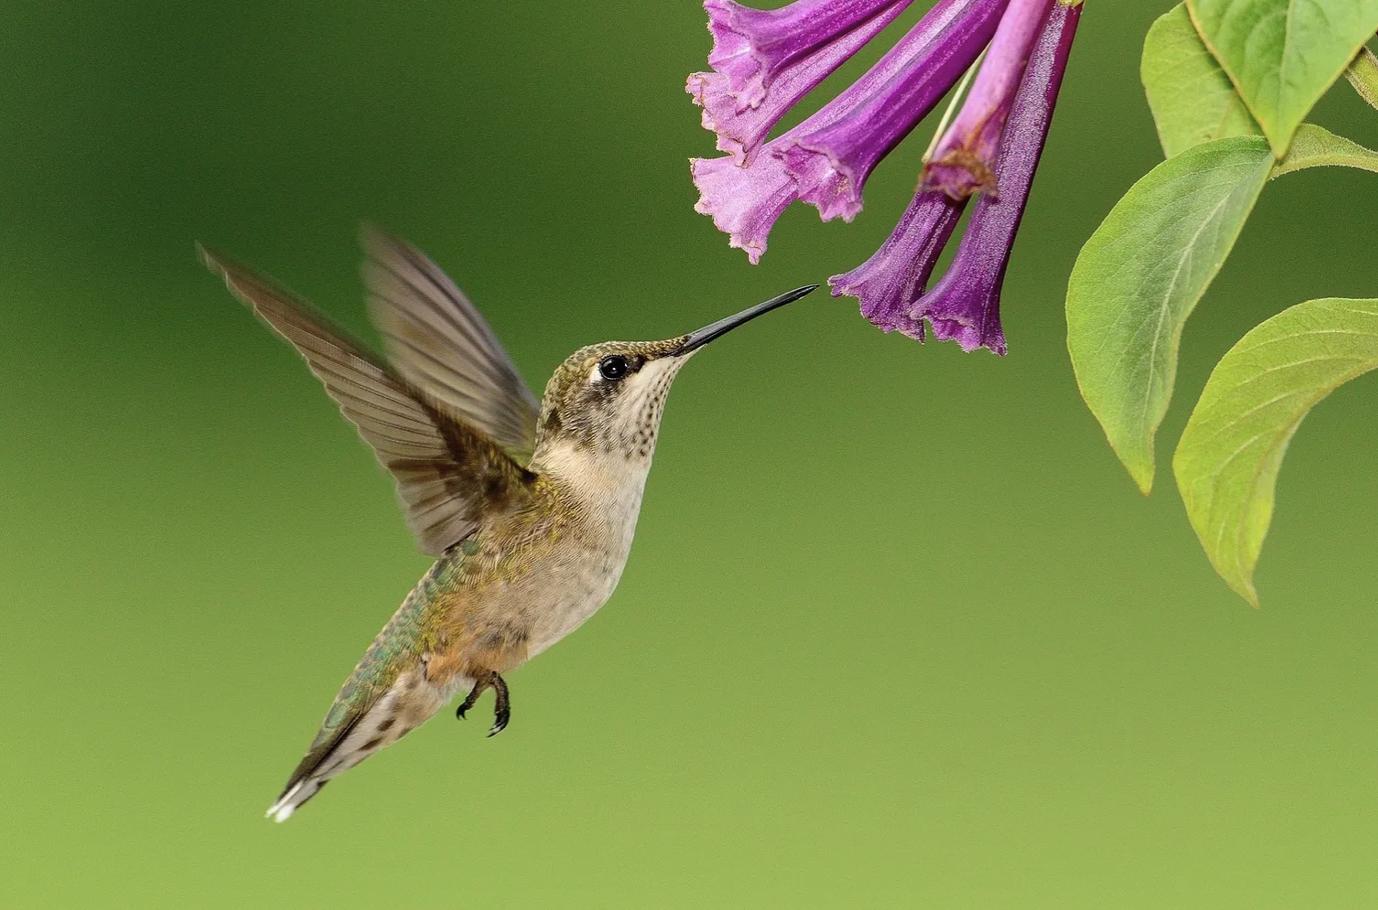 Switching it up: Why some plants prefer hummingbirds, not bees